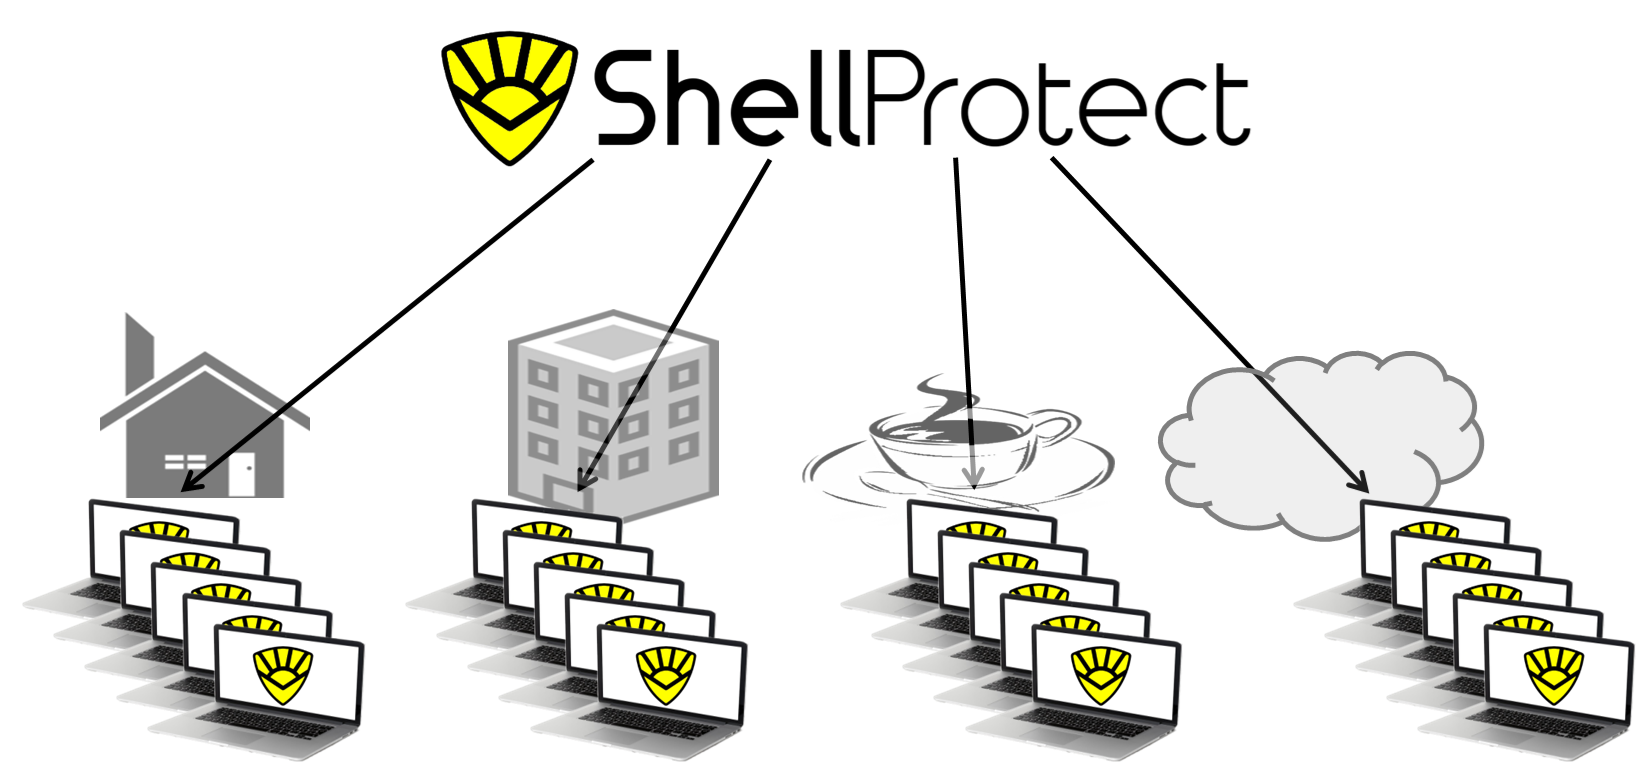 Shell Protect Cyber Security Centralised Management